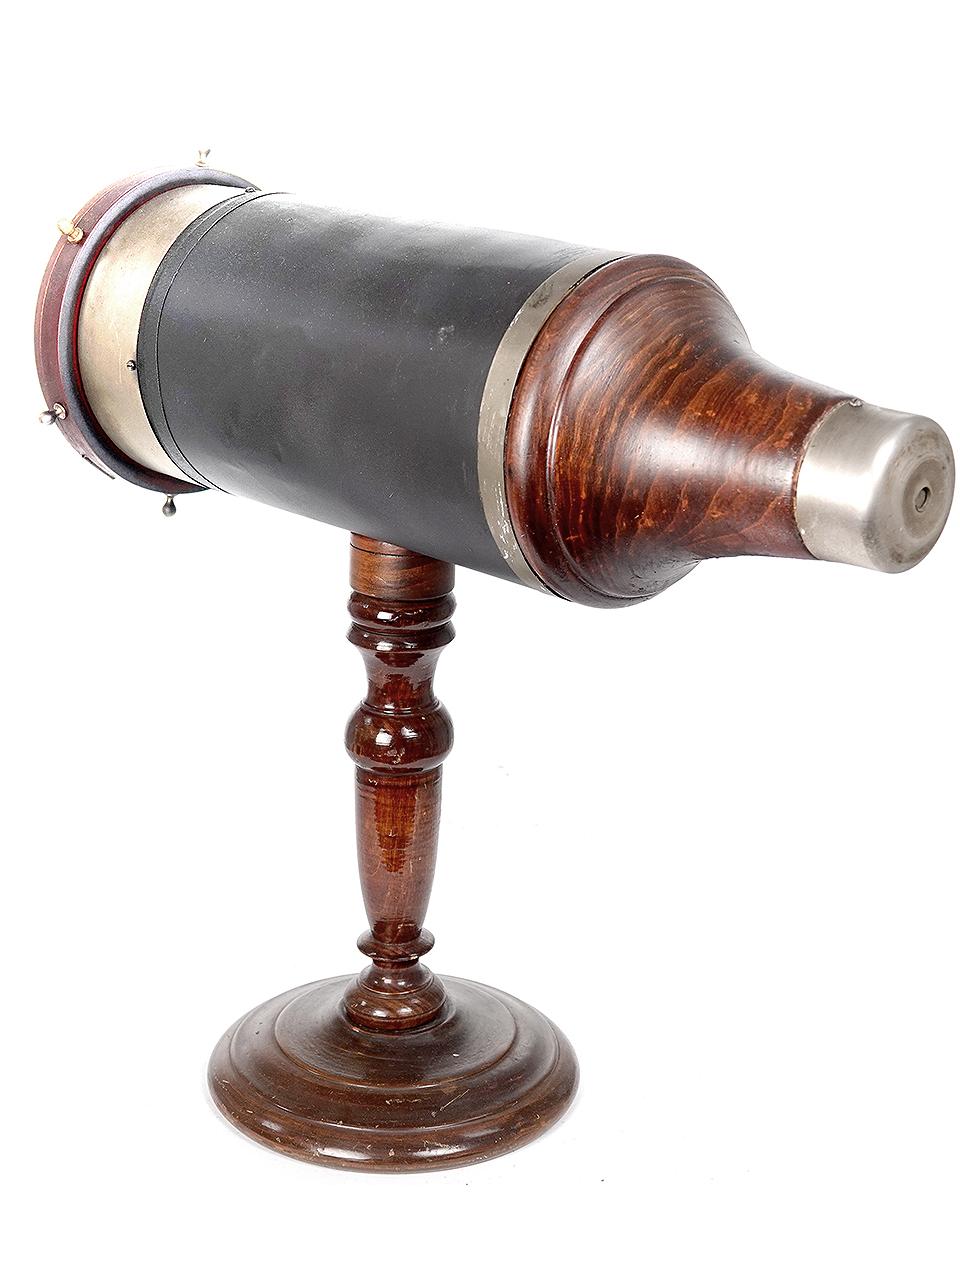 This scope is unsigned and was acquired from a European collector. It could be American but I'm guessing its not. The eyepiece and turning mechanism are brass. The tube is canvas wrapped and the tapered back is turned wood. The unique feature on